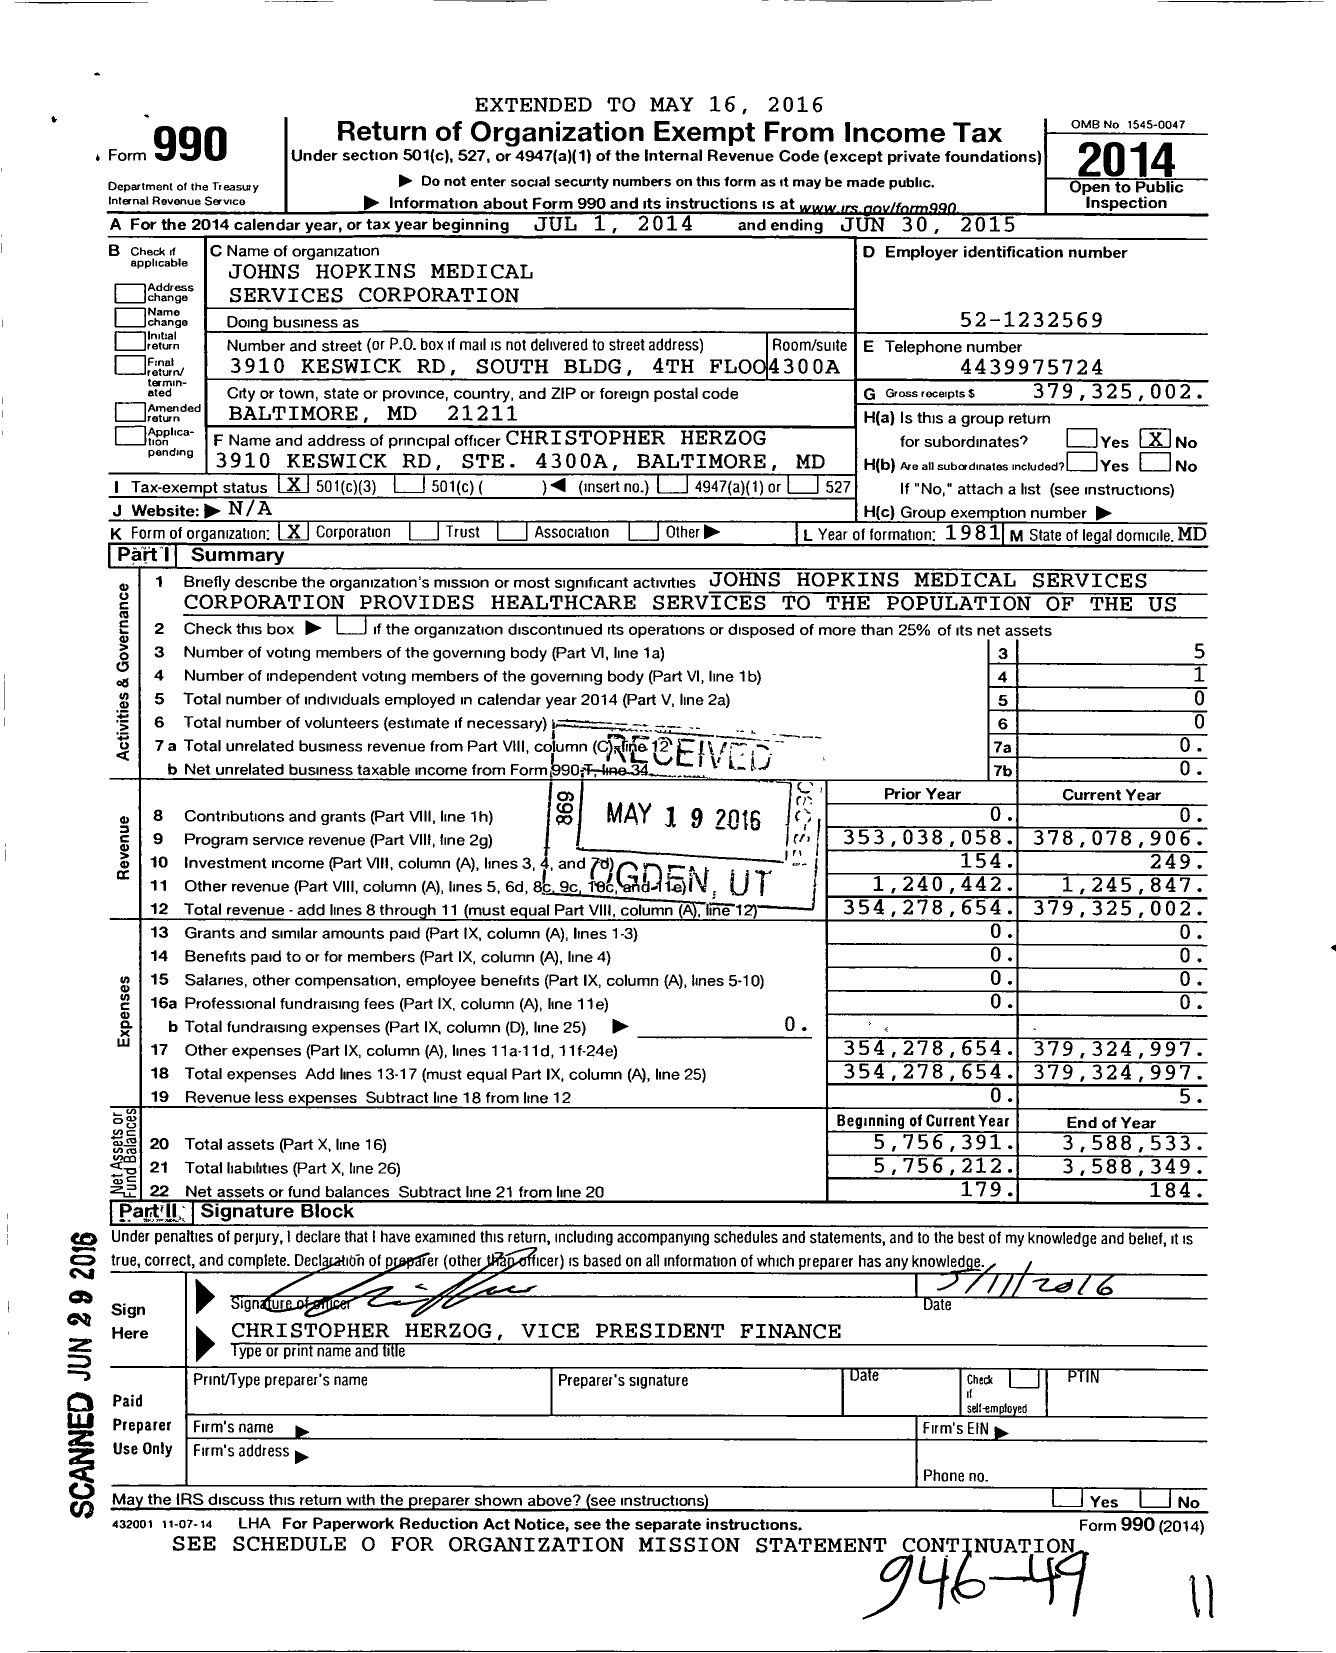 Image of first page of 2014 Form 990 for Johns Hopkins Medical Services Corporation